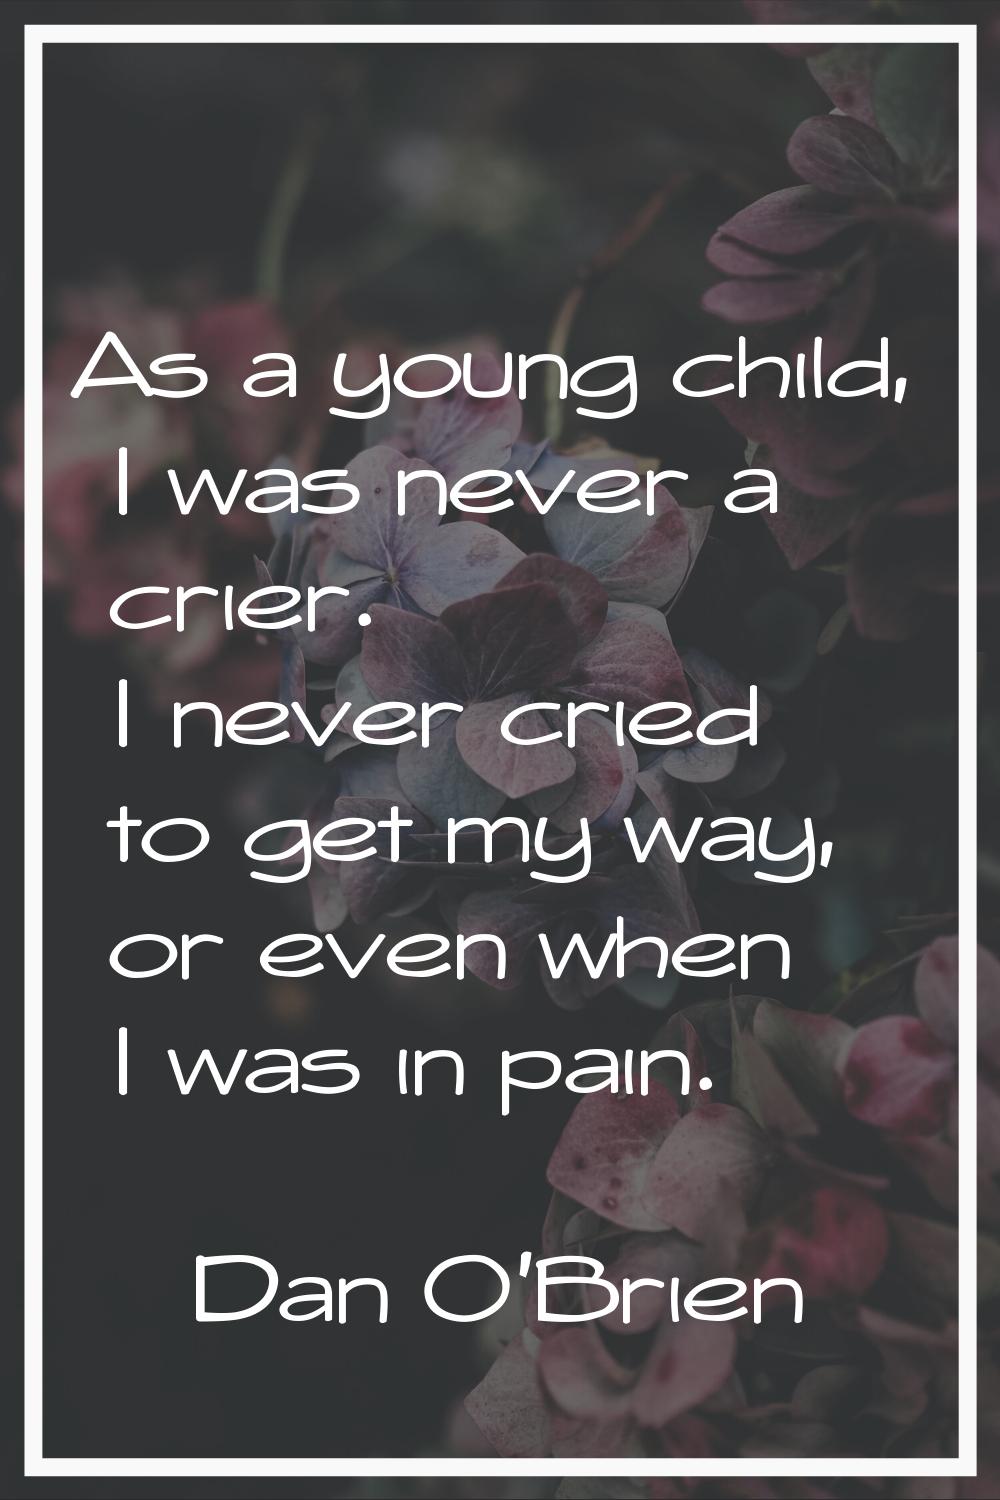 As a young child, I was never a crier. I never cried to get my way, or even when I was in pain.